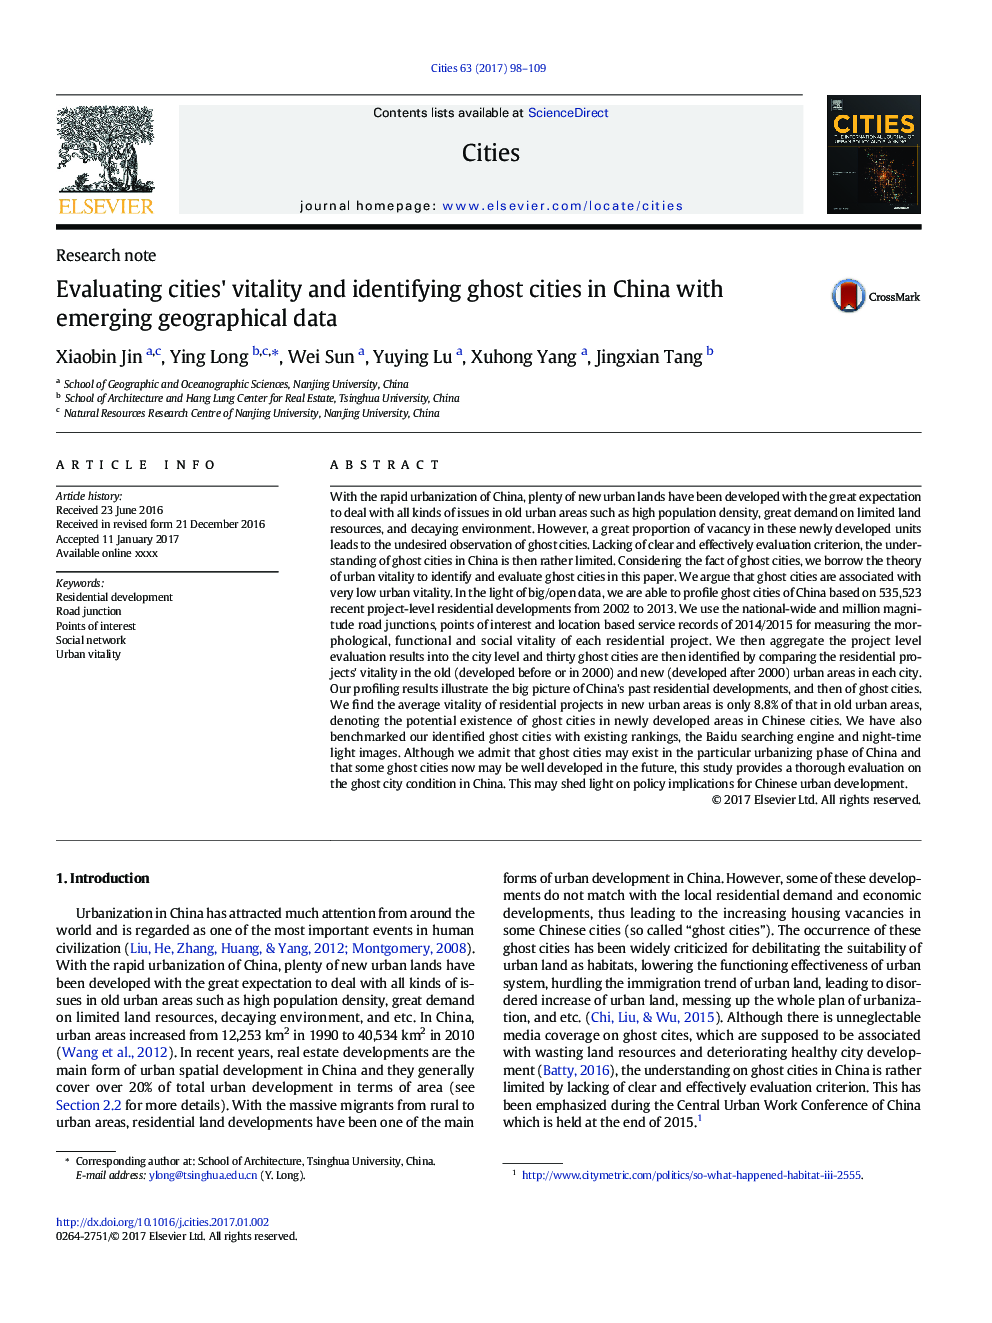 Evaluating cities' vitality and identifying ghost cities in China with emerging geographical data